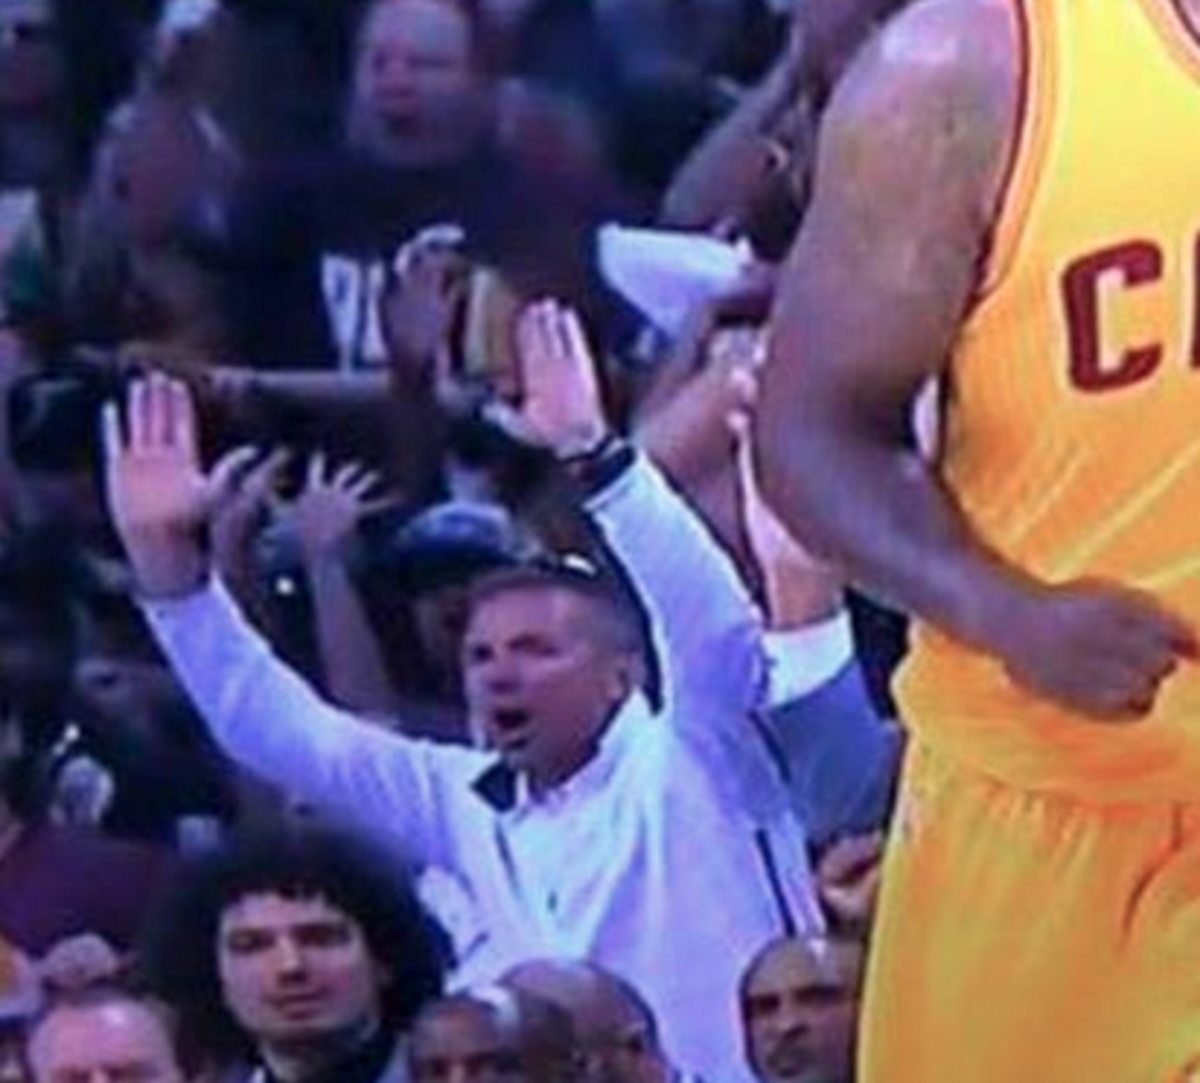 Urban Meyer shows excitement during the cavaliers game.